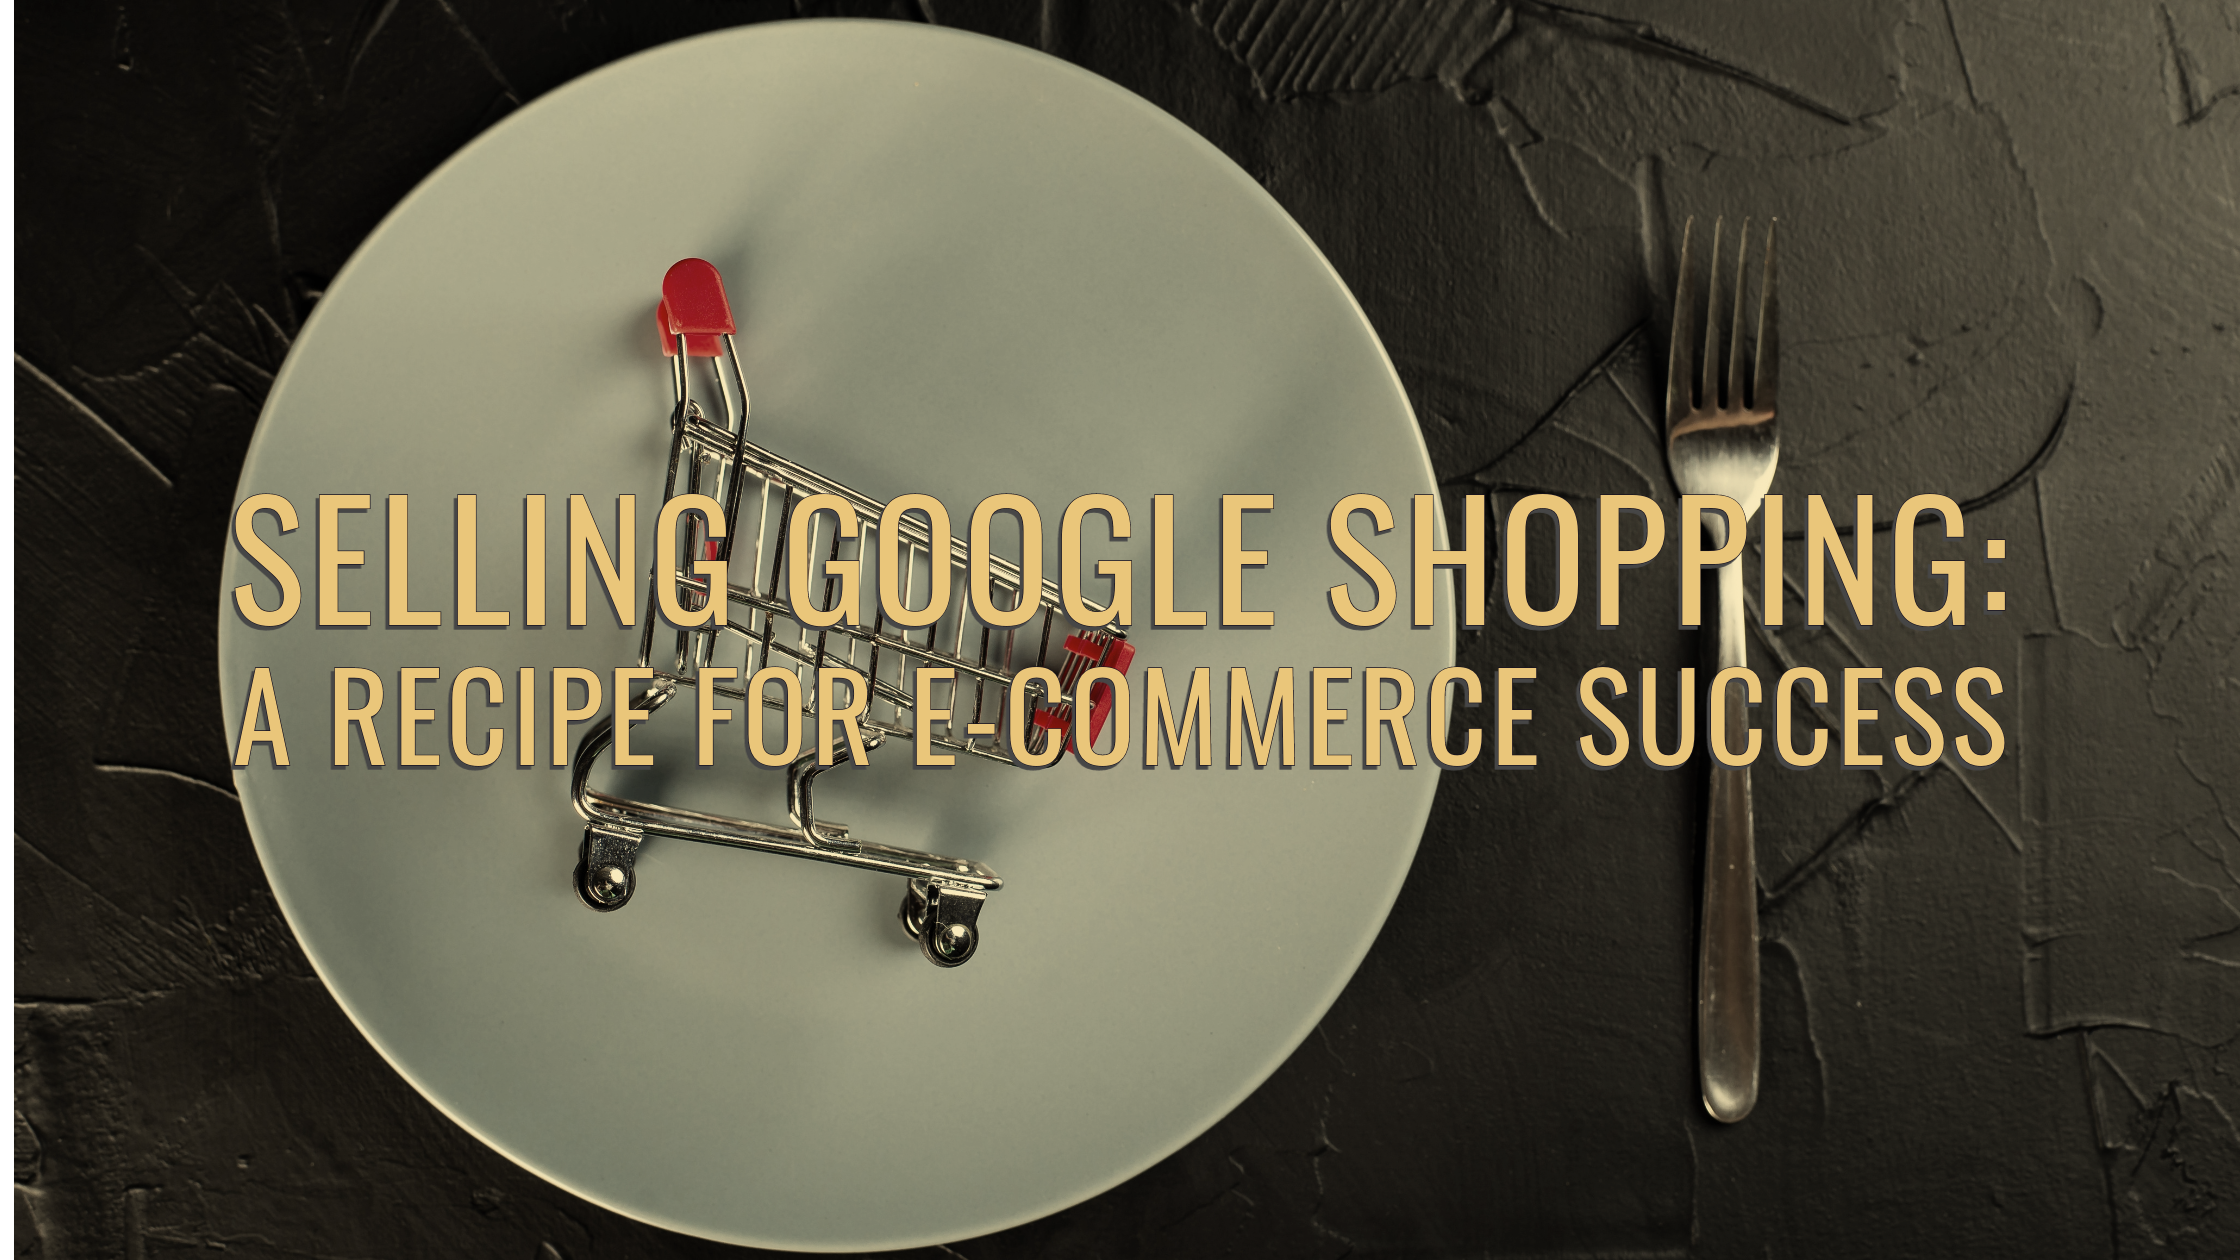 Selling Google Shopping: A Recipe for E-Commerce Success